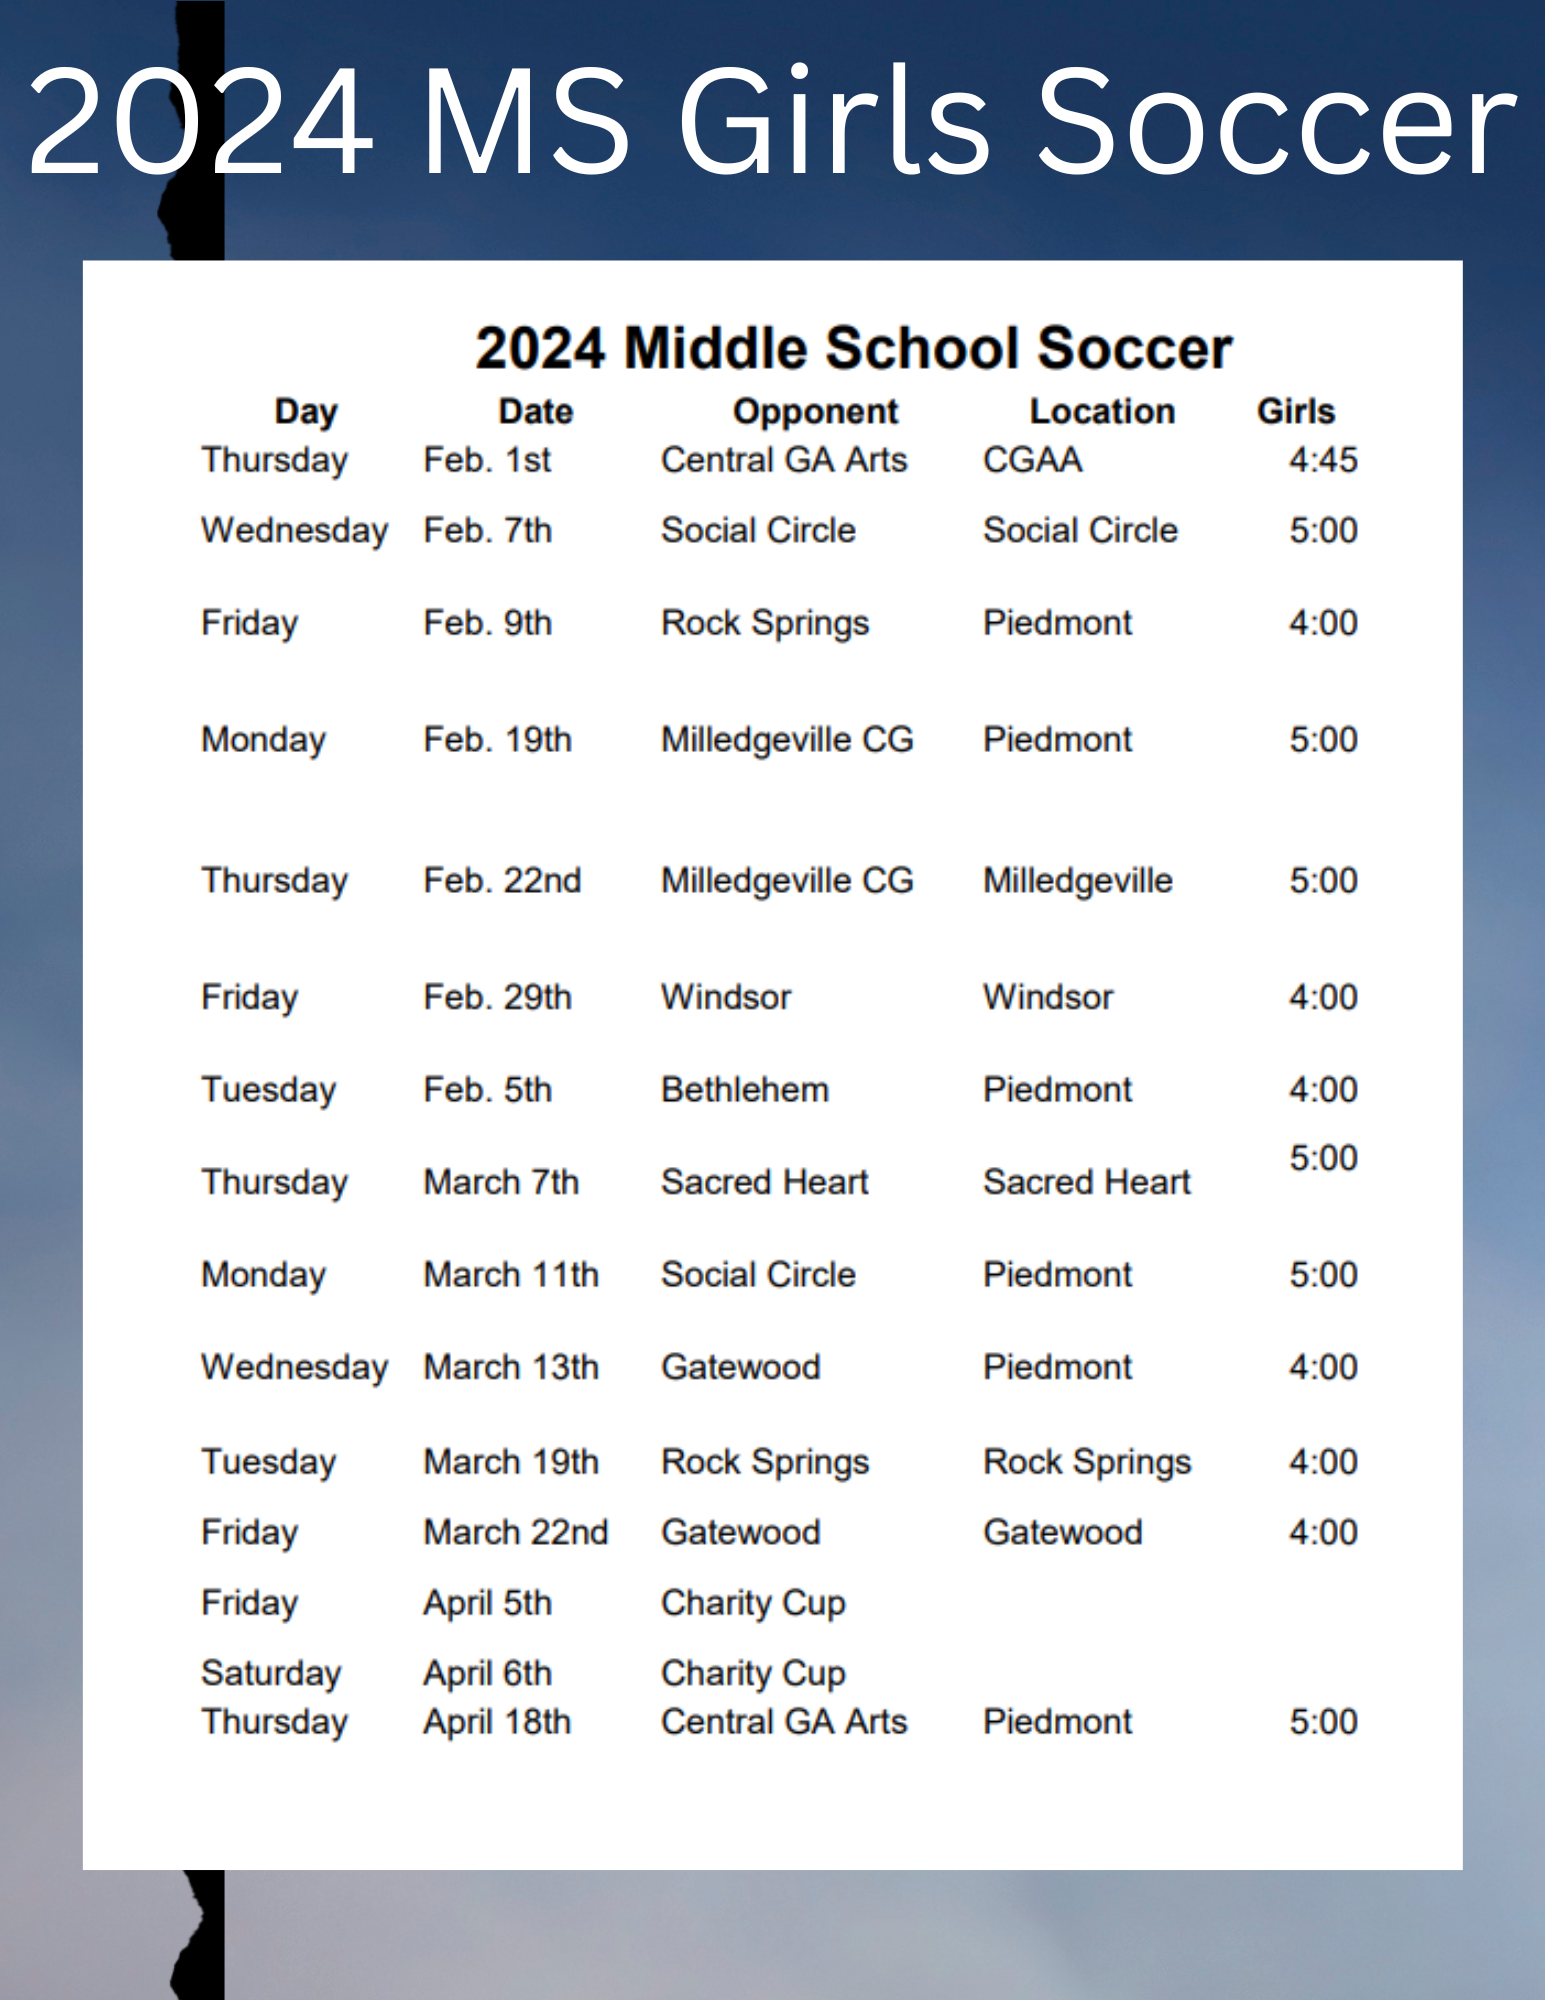 a soccer schedule for the 2024 ms girls soccer season